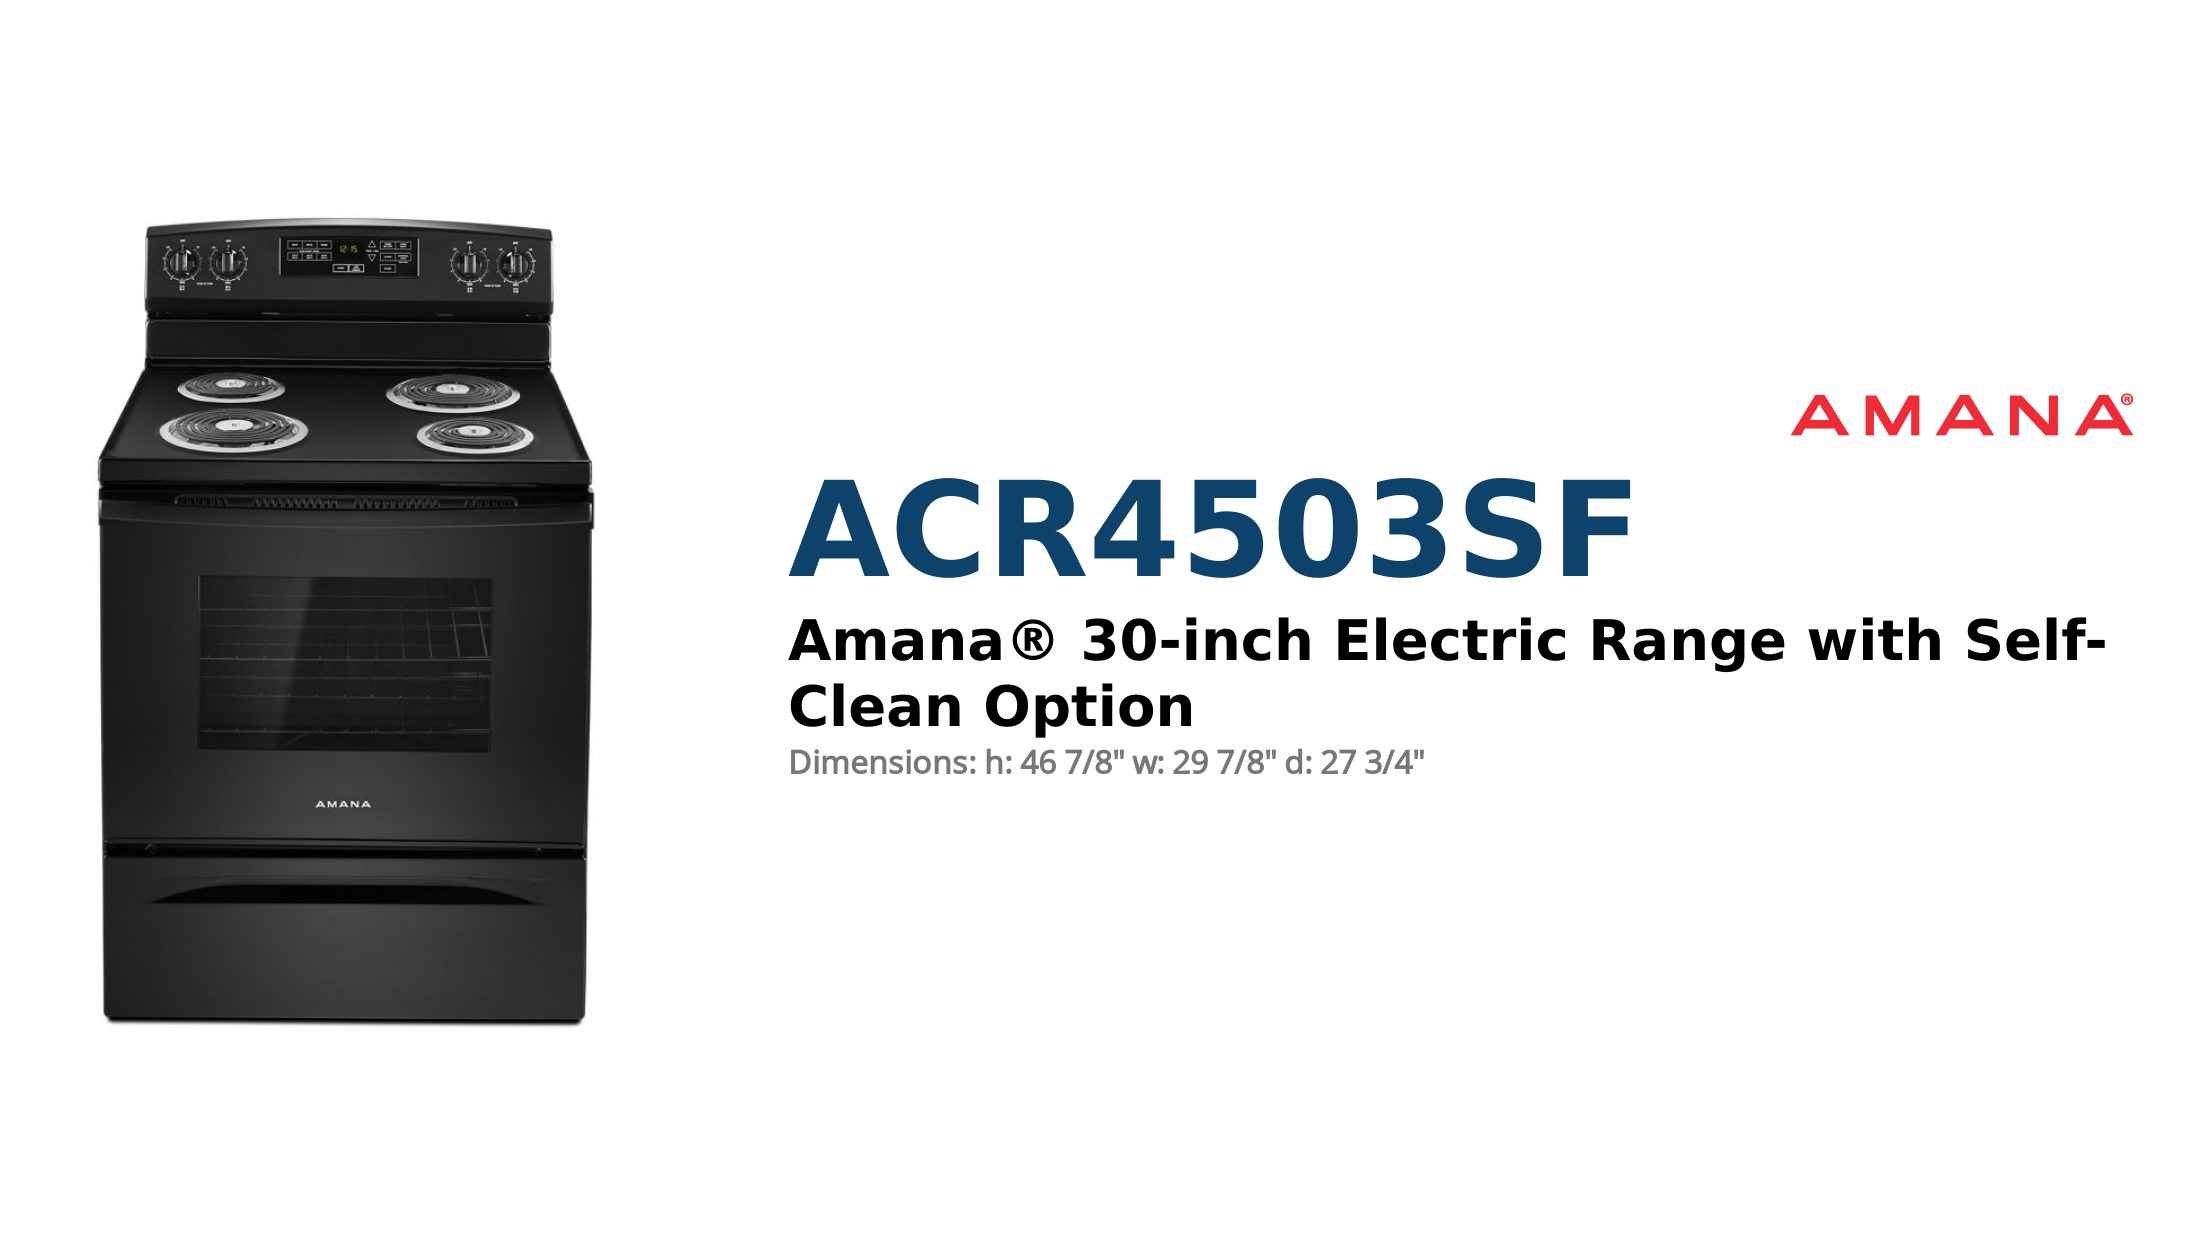 Amana® 30-inch Electric Range with Self-Clean Option